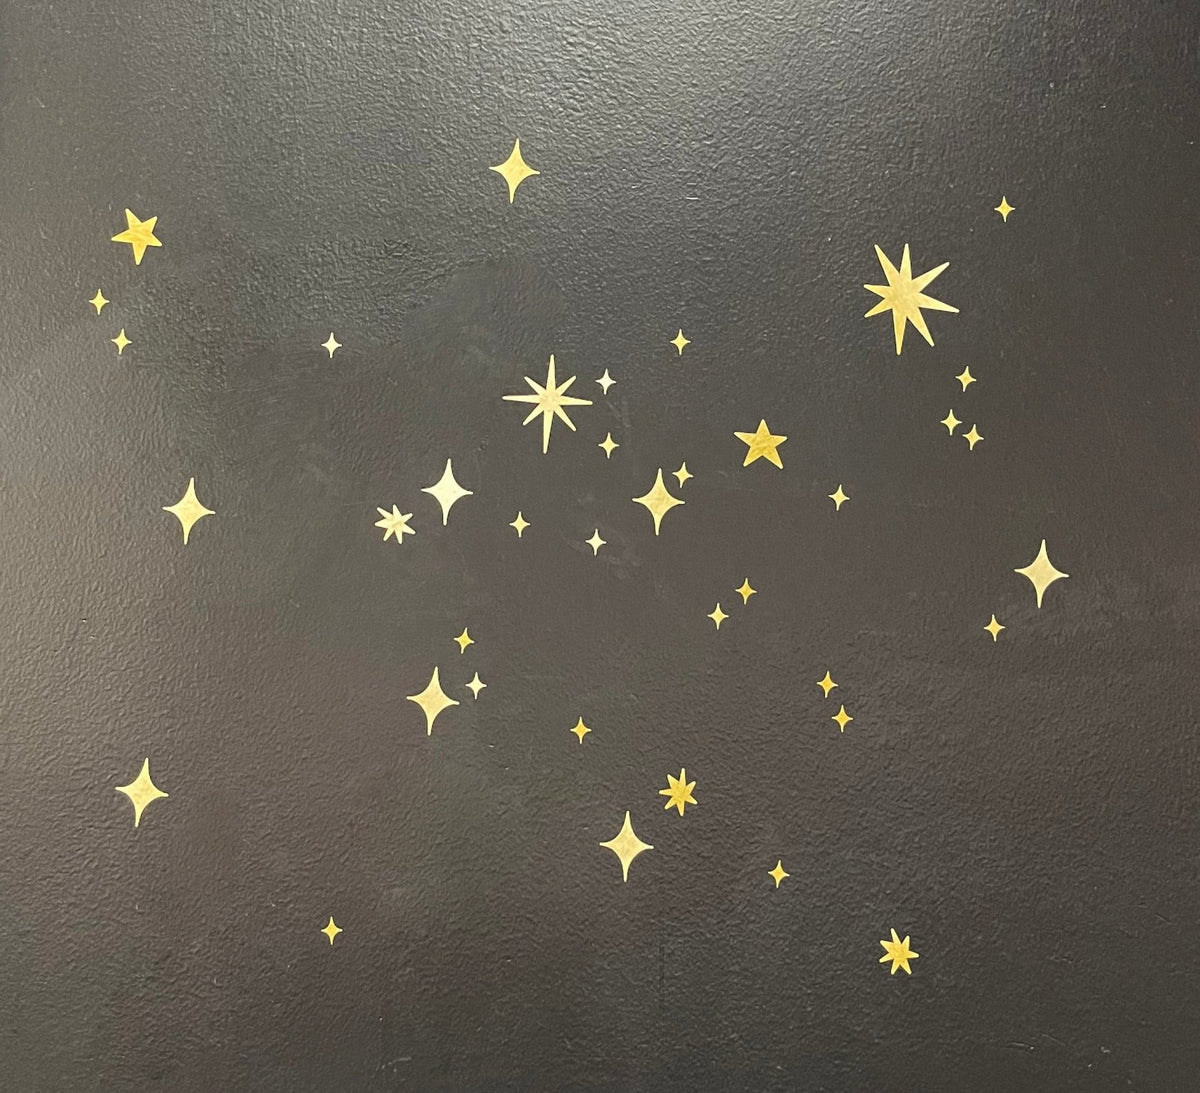 Gold Twinkly Stars stickers of various sizes scattered randomly on a dark gray background, creating a magical scene decor. (Cover-Alls)